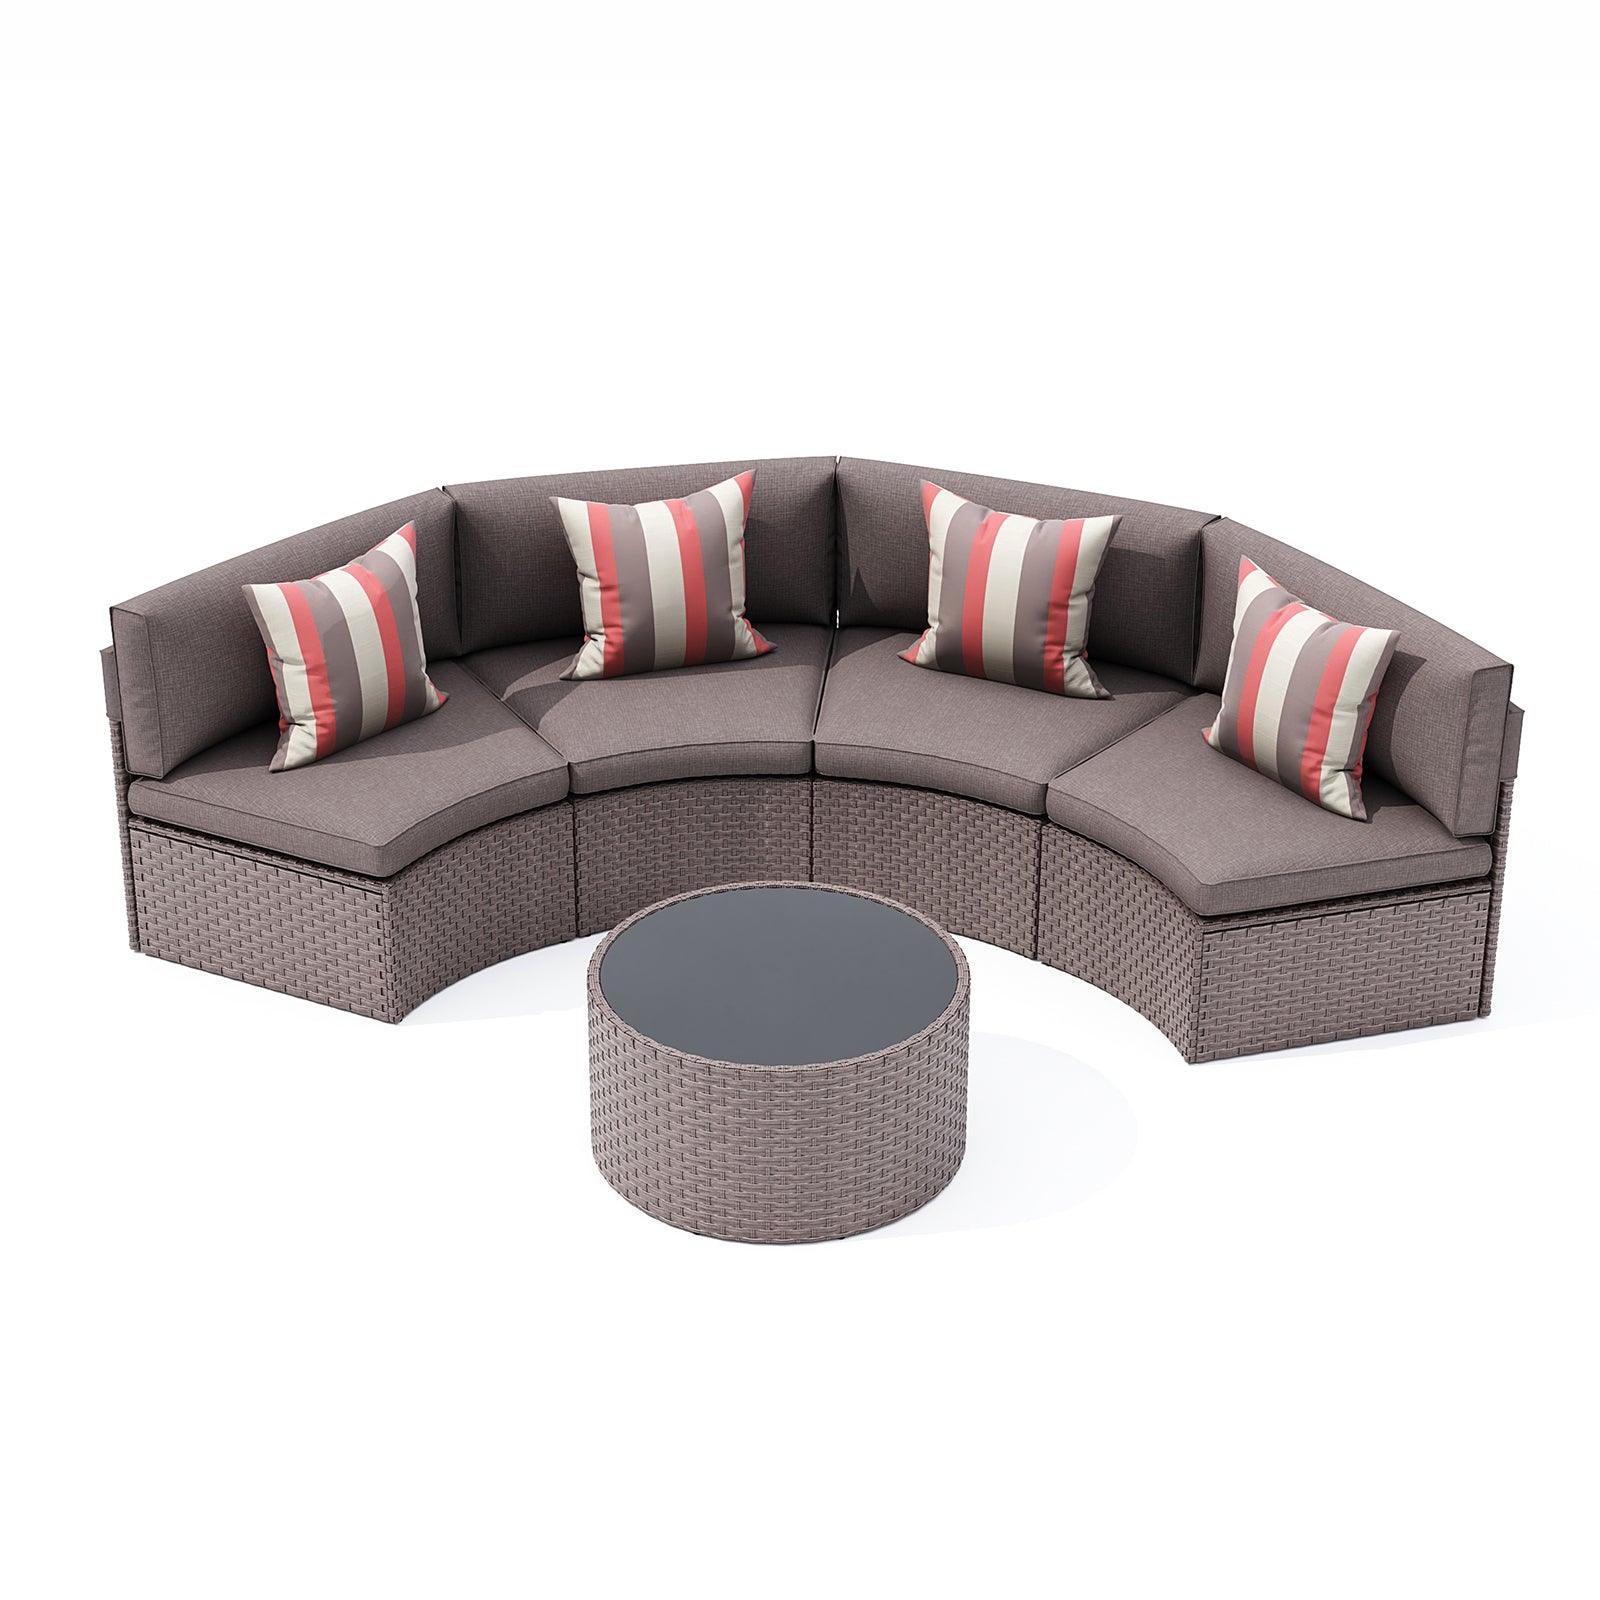 Halo II 5-pc. Outdoor Half-Moon Sectional Set, Taupe sale